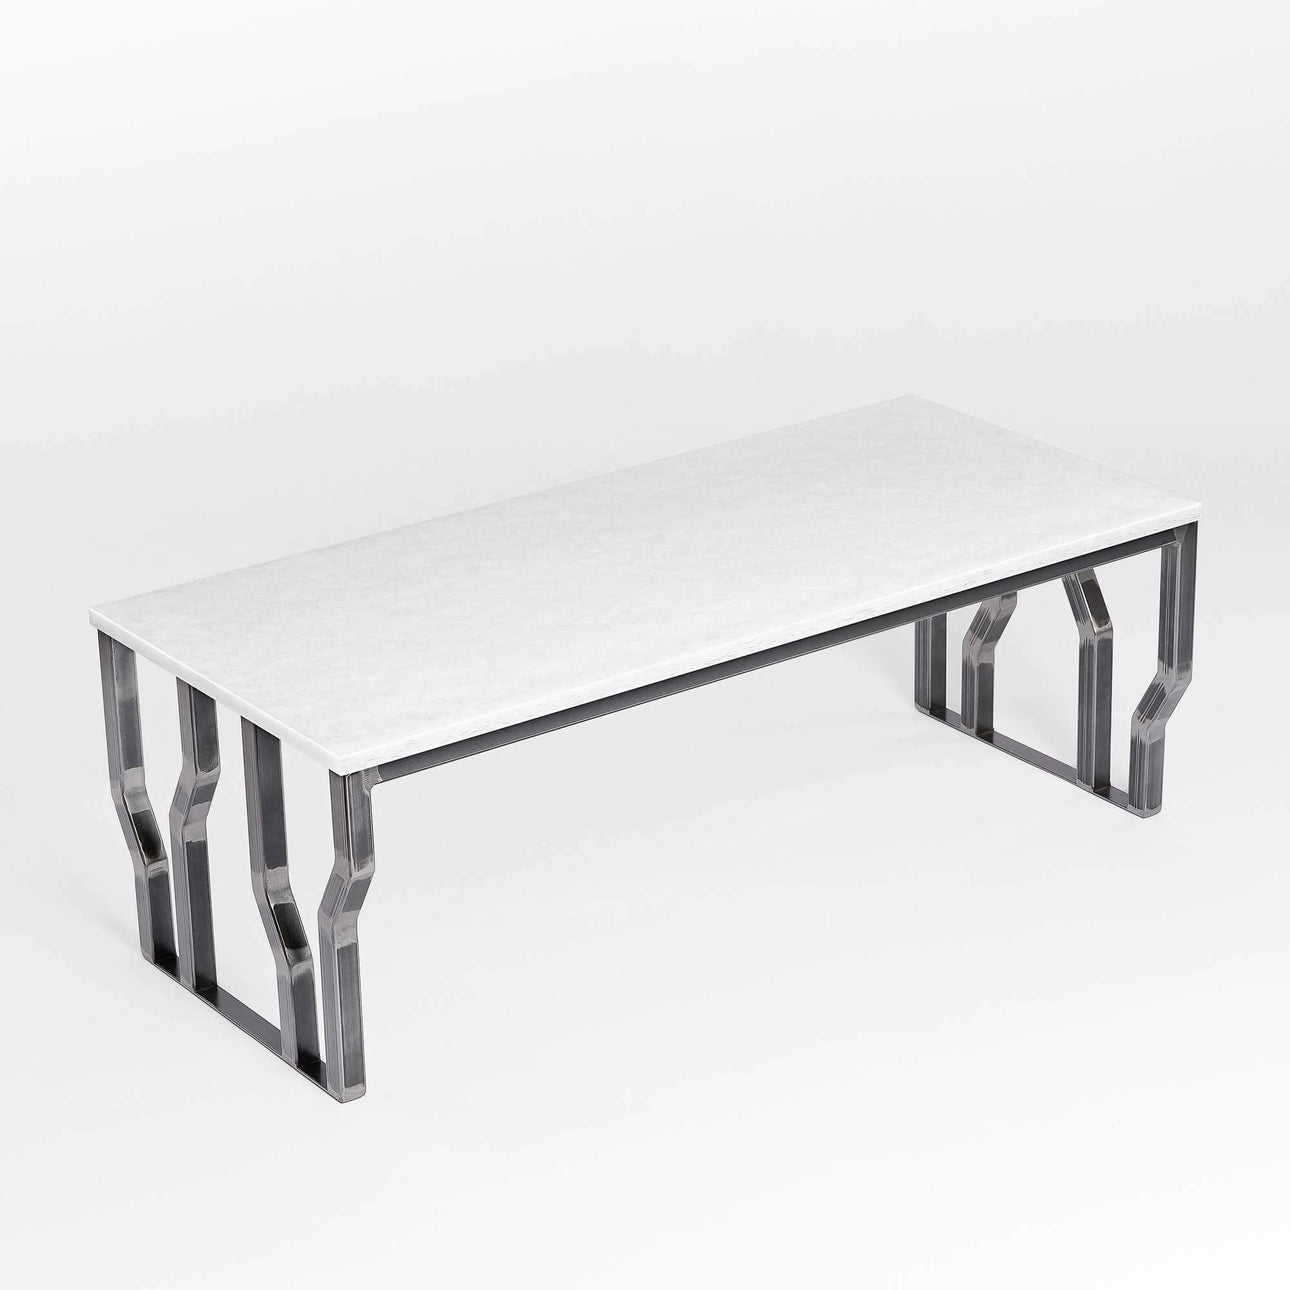 Silicon Valley glass ceramic coffee table